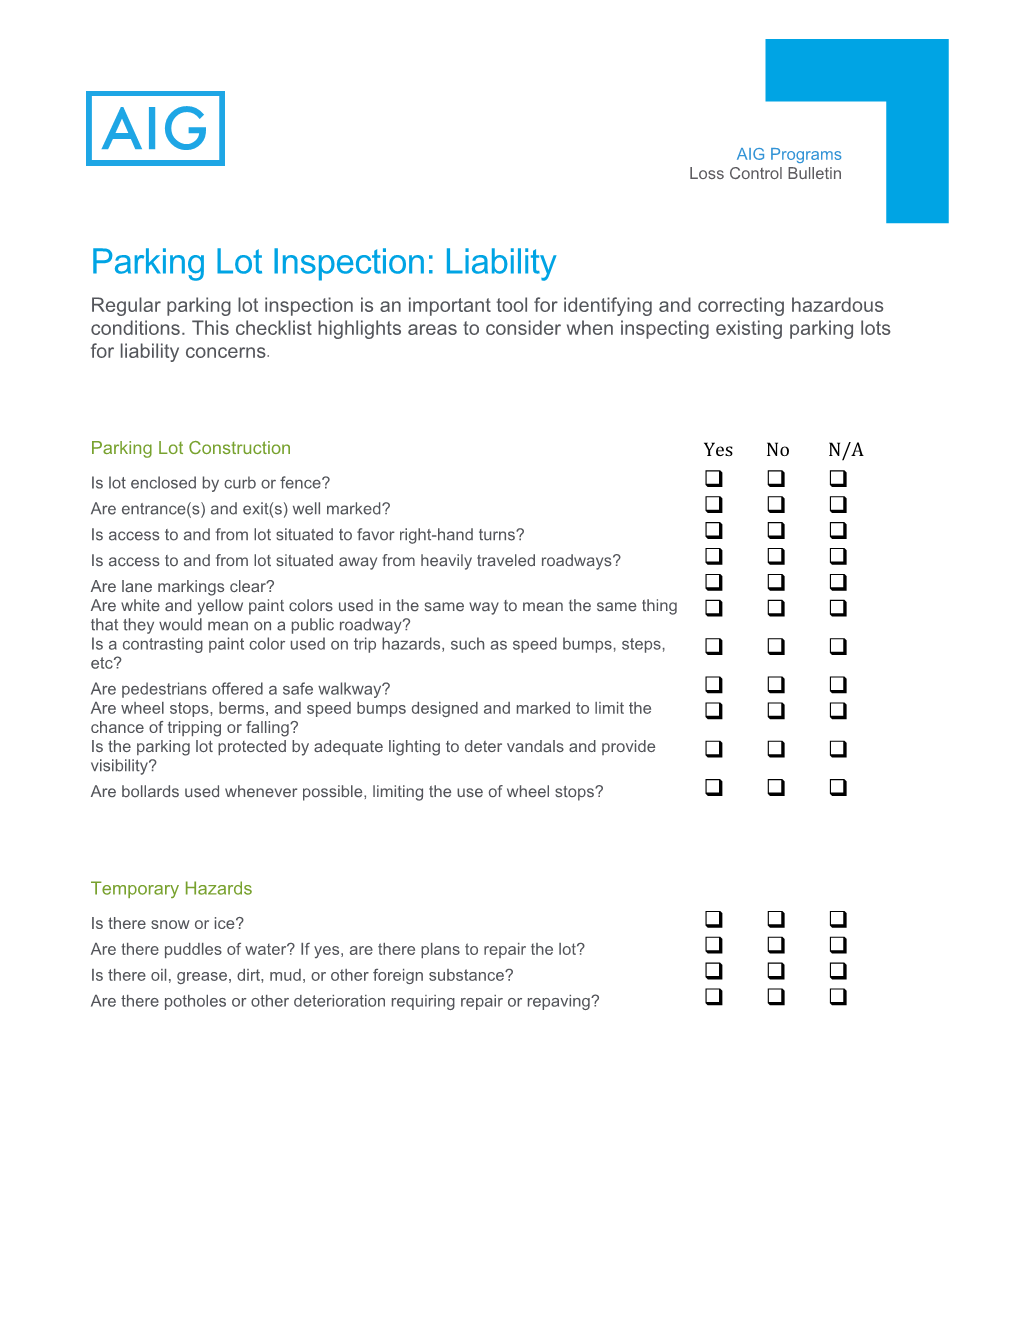 Parking Lot Inspection: Liability Regular Parking Lot Inspection Is an Important Tool for Identifying and Correcting Hazardous Conditions